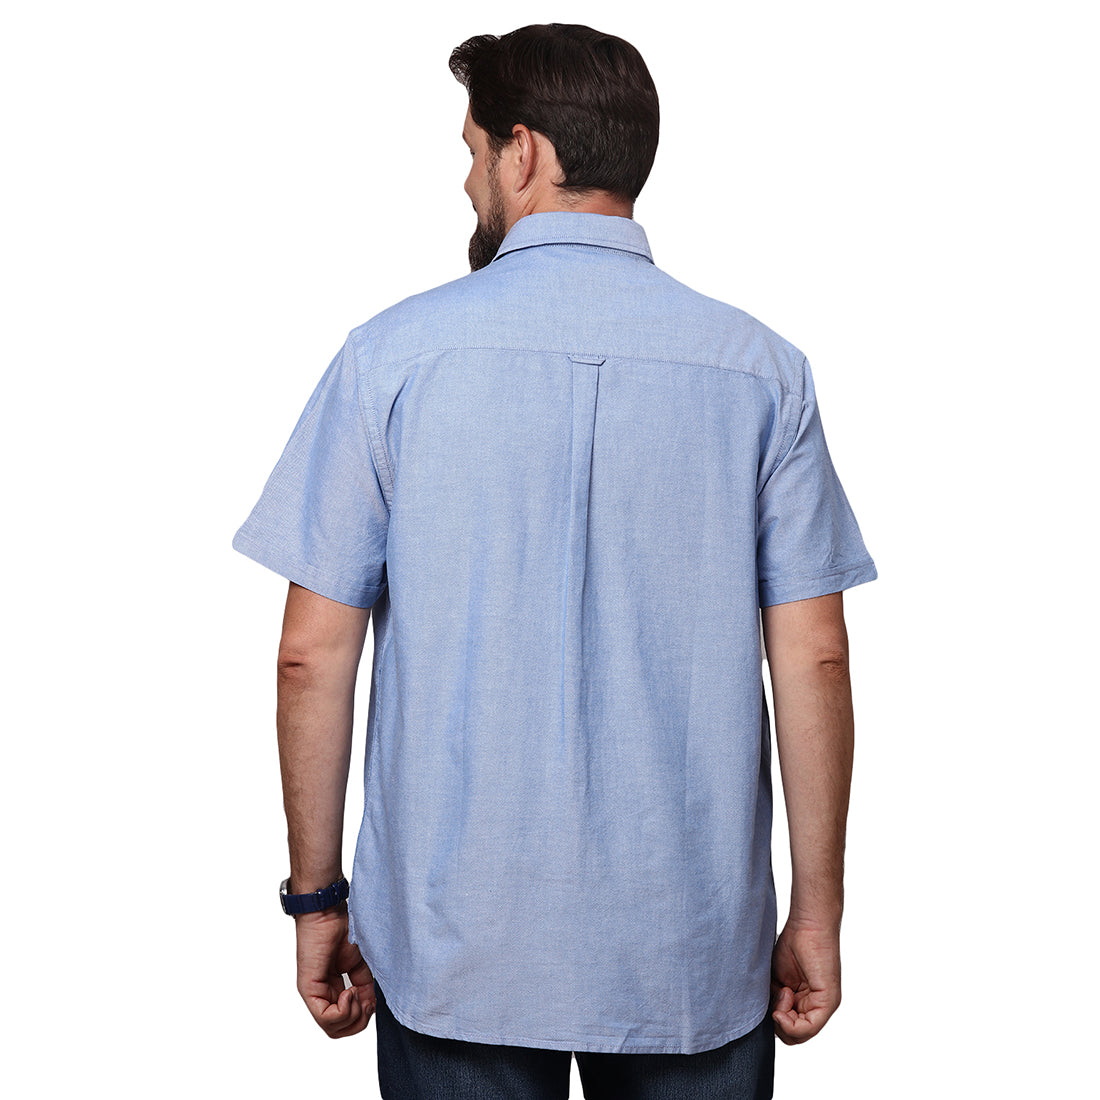 Big & Bold Solid Blue Half Sleeves Slim Fit Casual Shirts (Plus Size) - Double Two